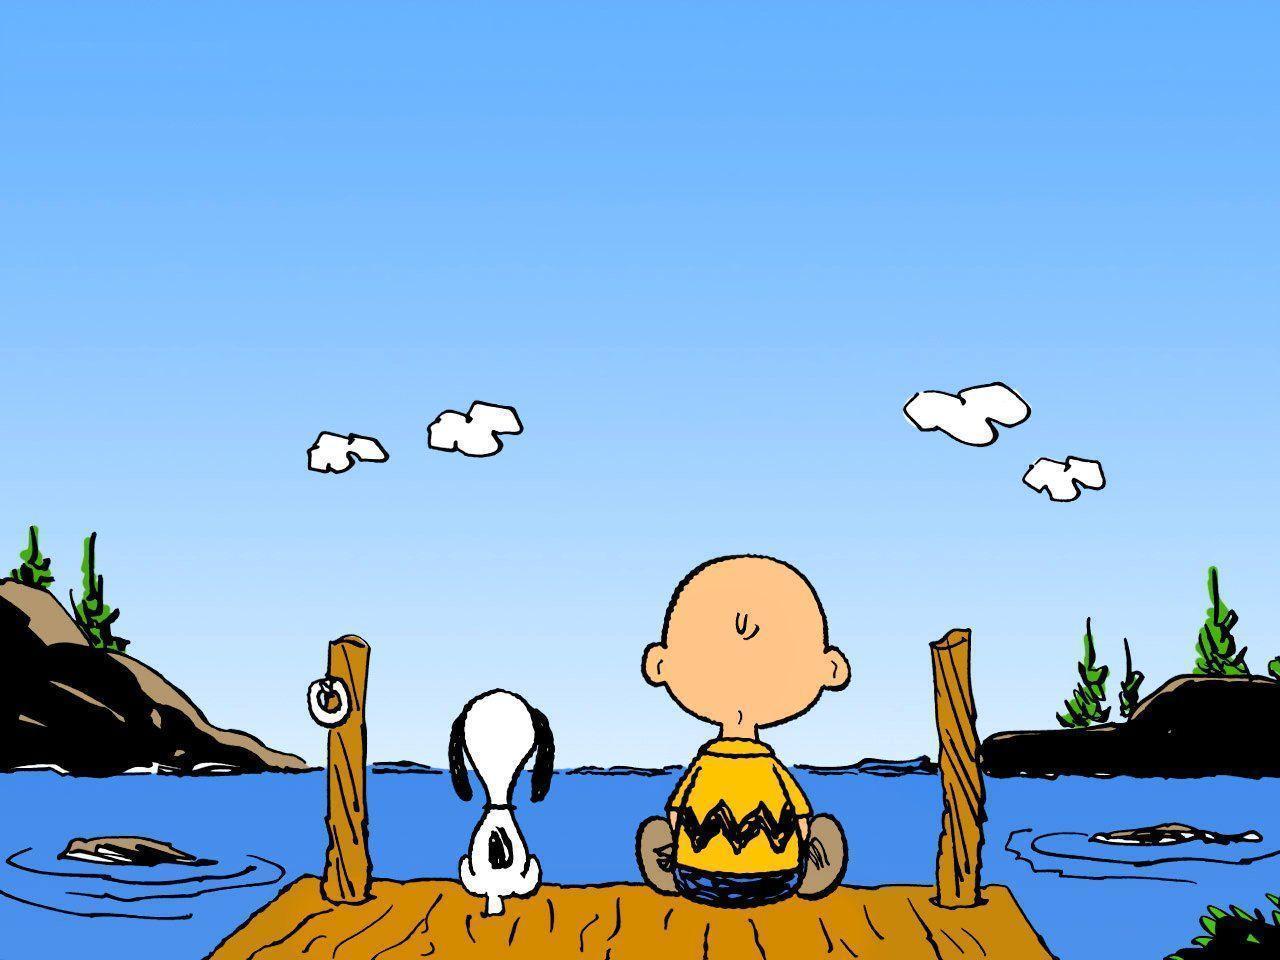 Download Snoopy Charlie Wallpapers 1280x960